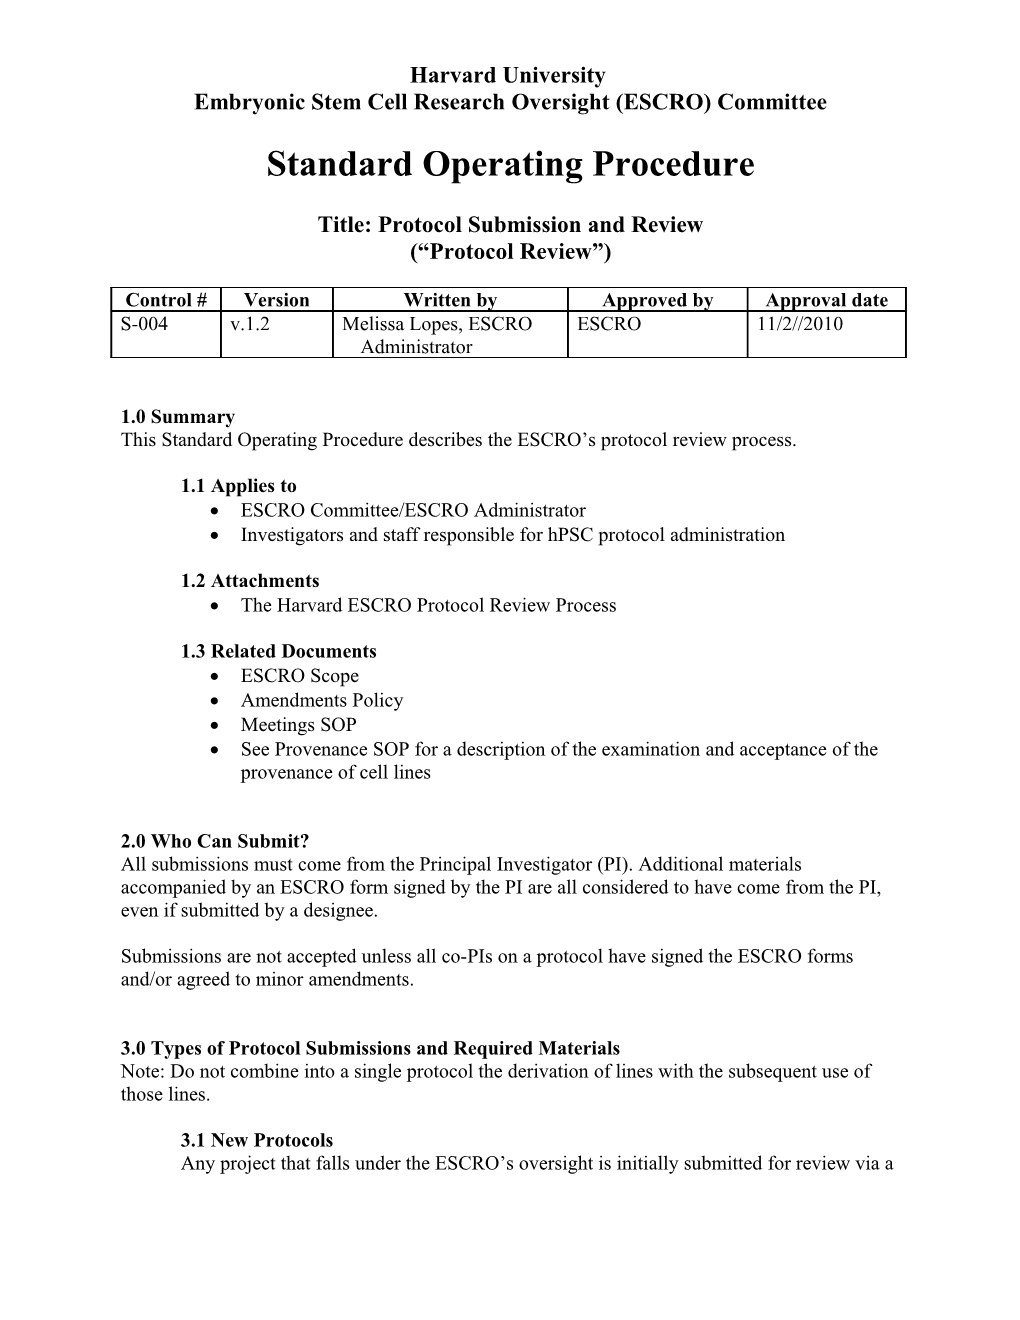 This Standard Operating Procedure Describes the ESCRO Sprotocol Review Process